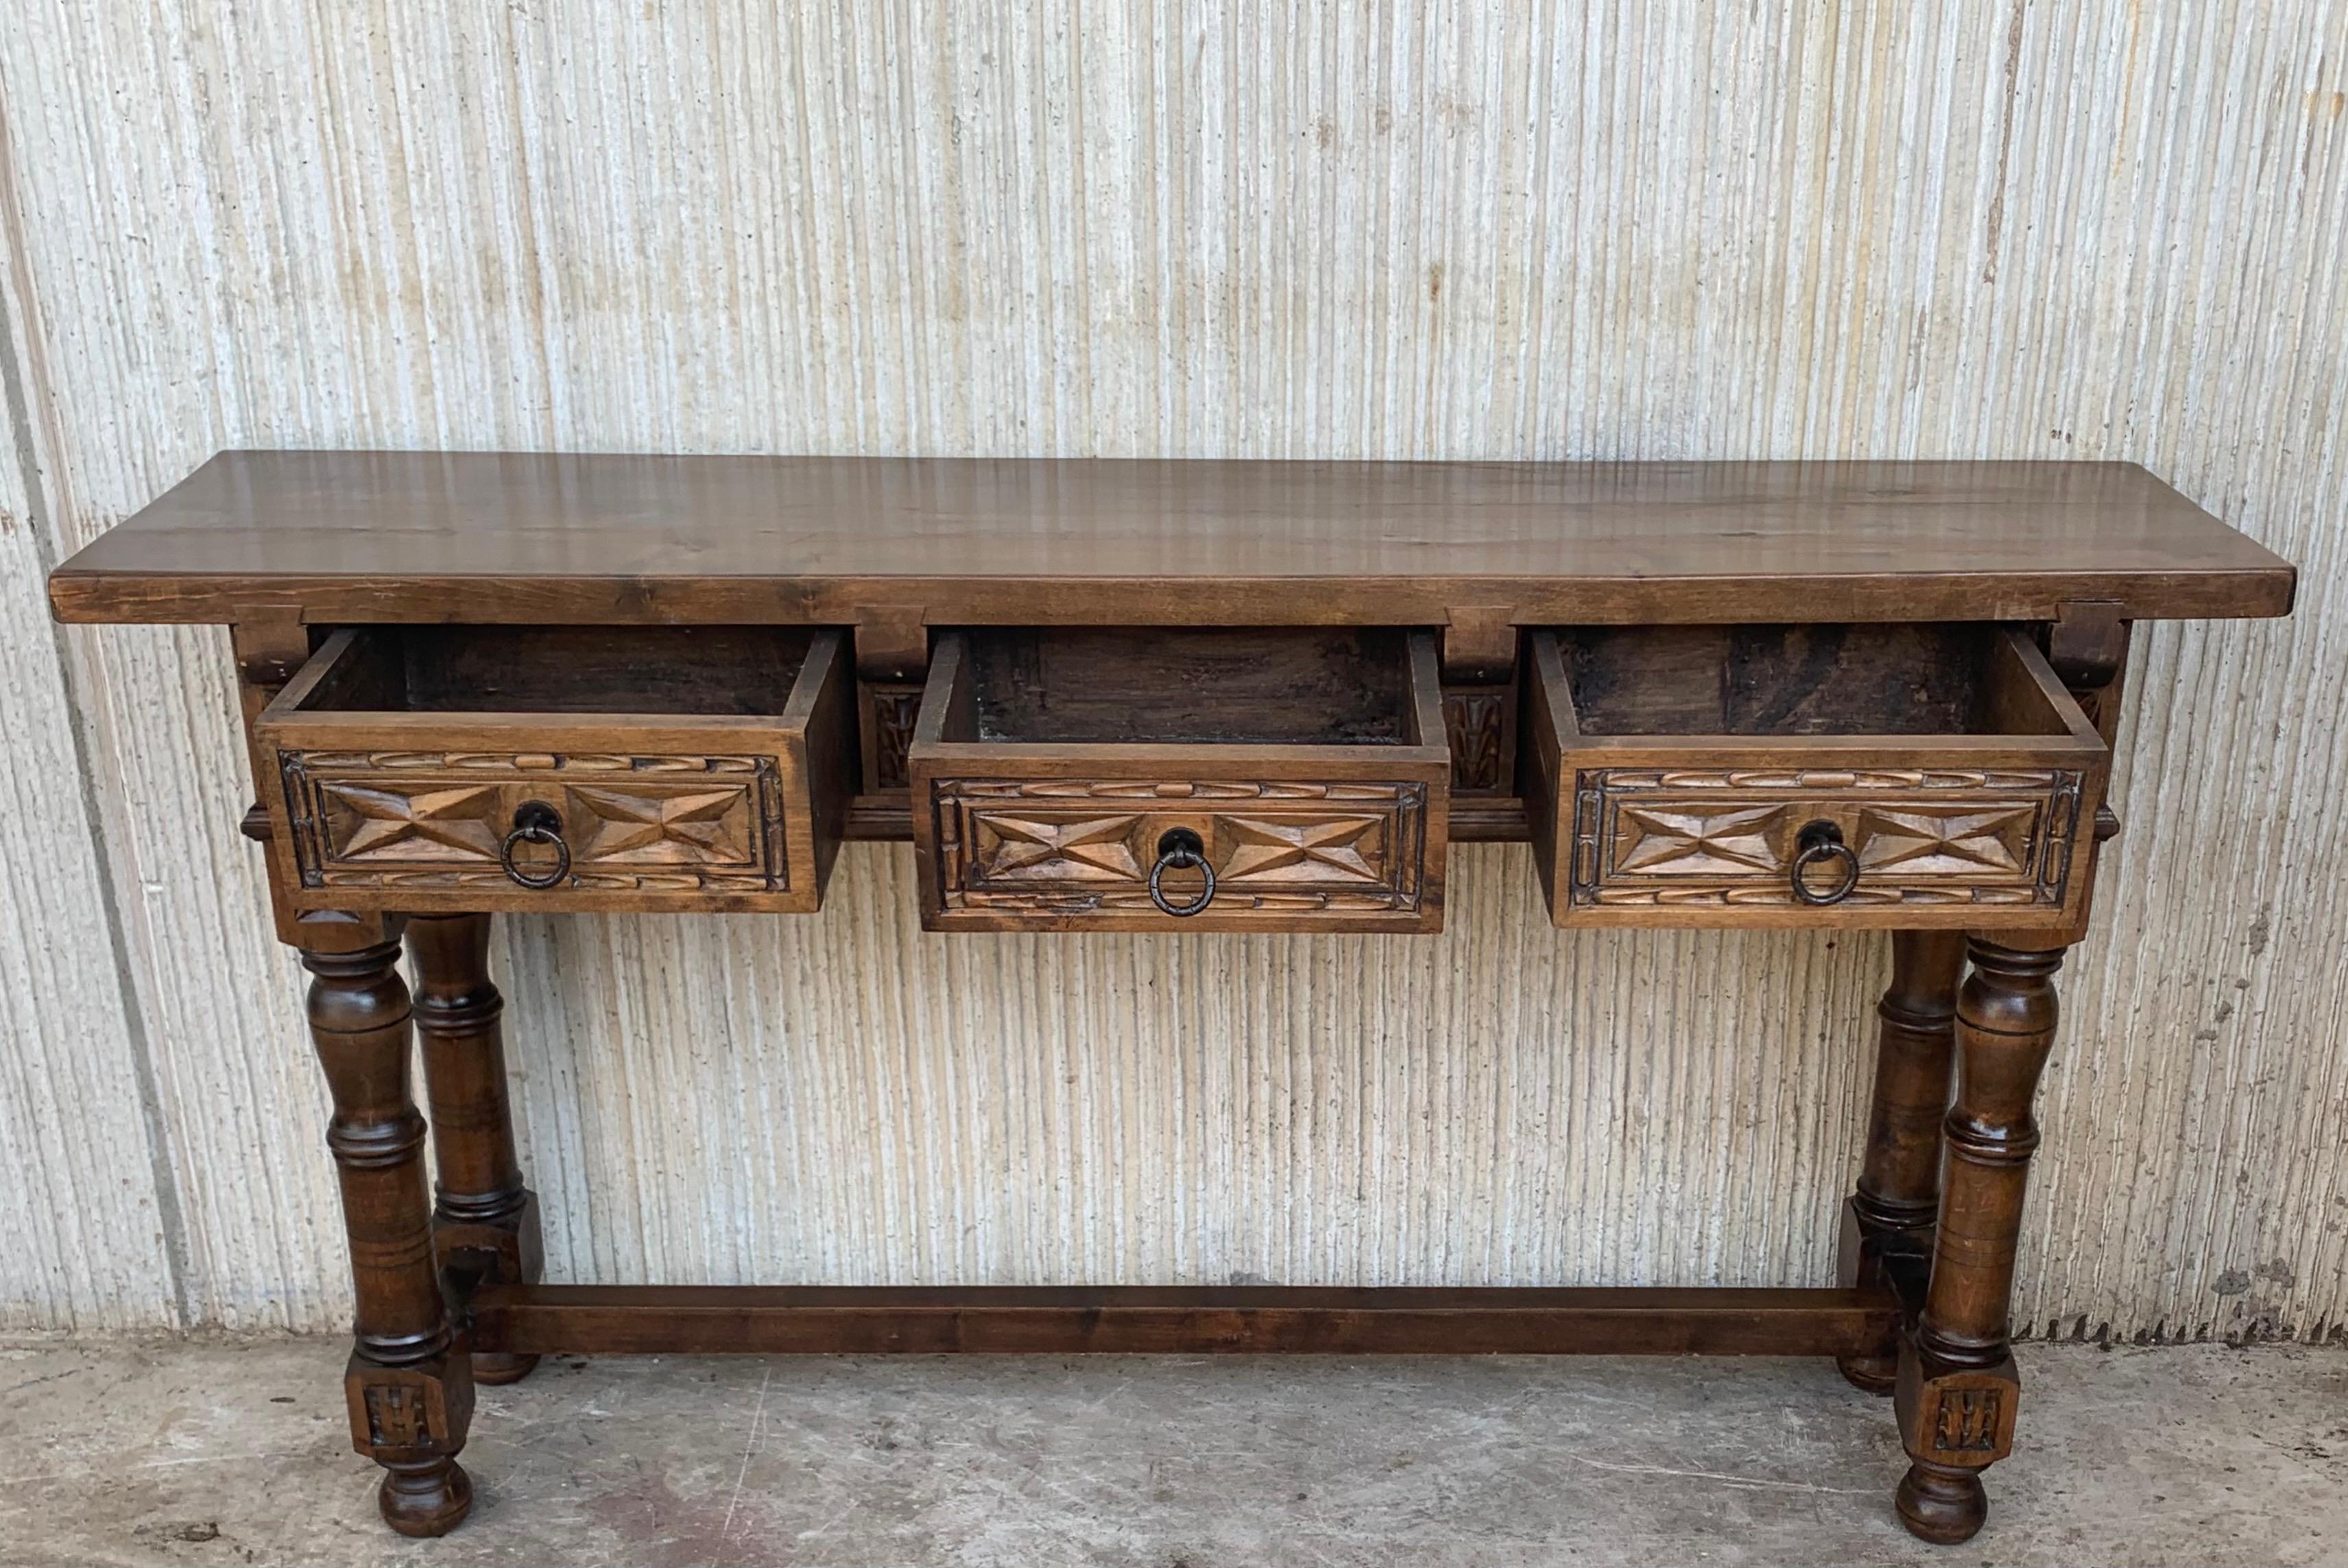 Hand-Carved Early 19th Century Carved Walnut Wood Catalan Spanish Console Table